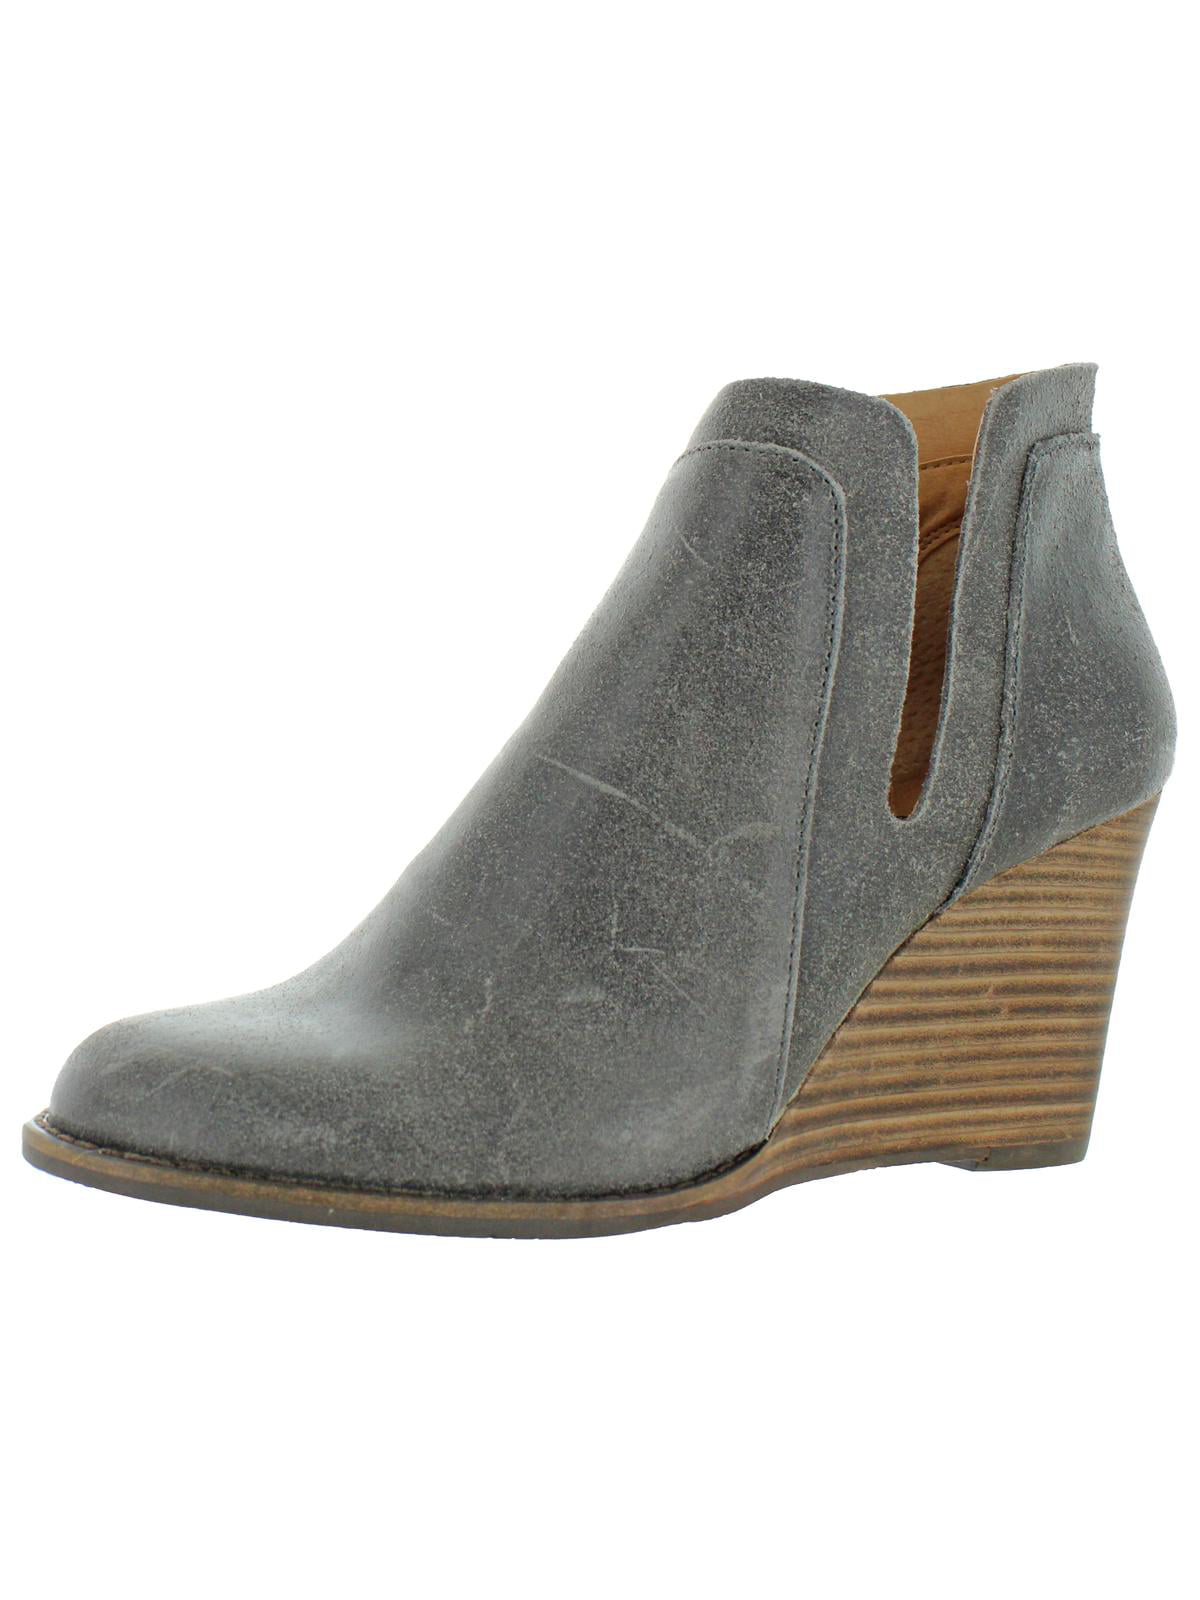 lucky brand side cut wedge suede booties